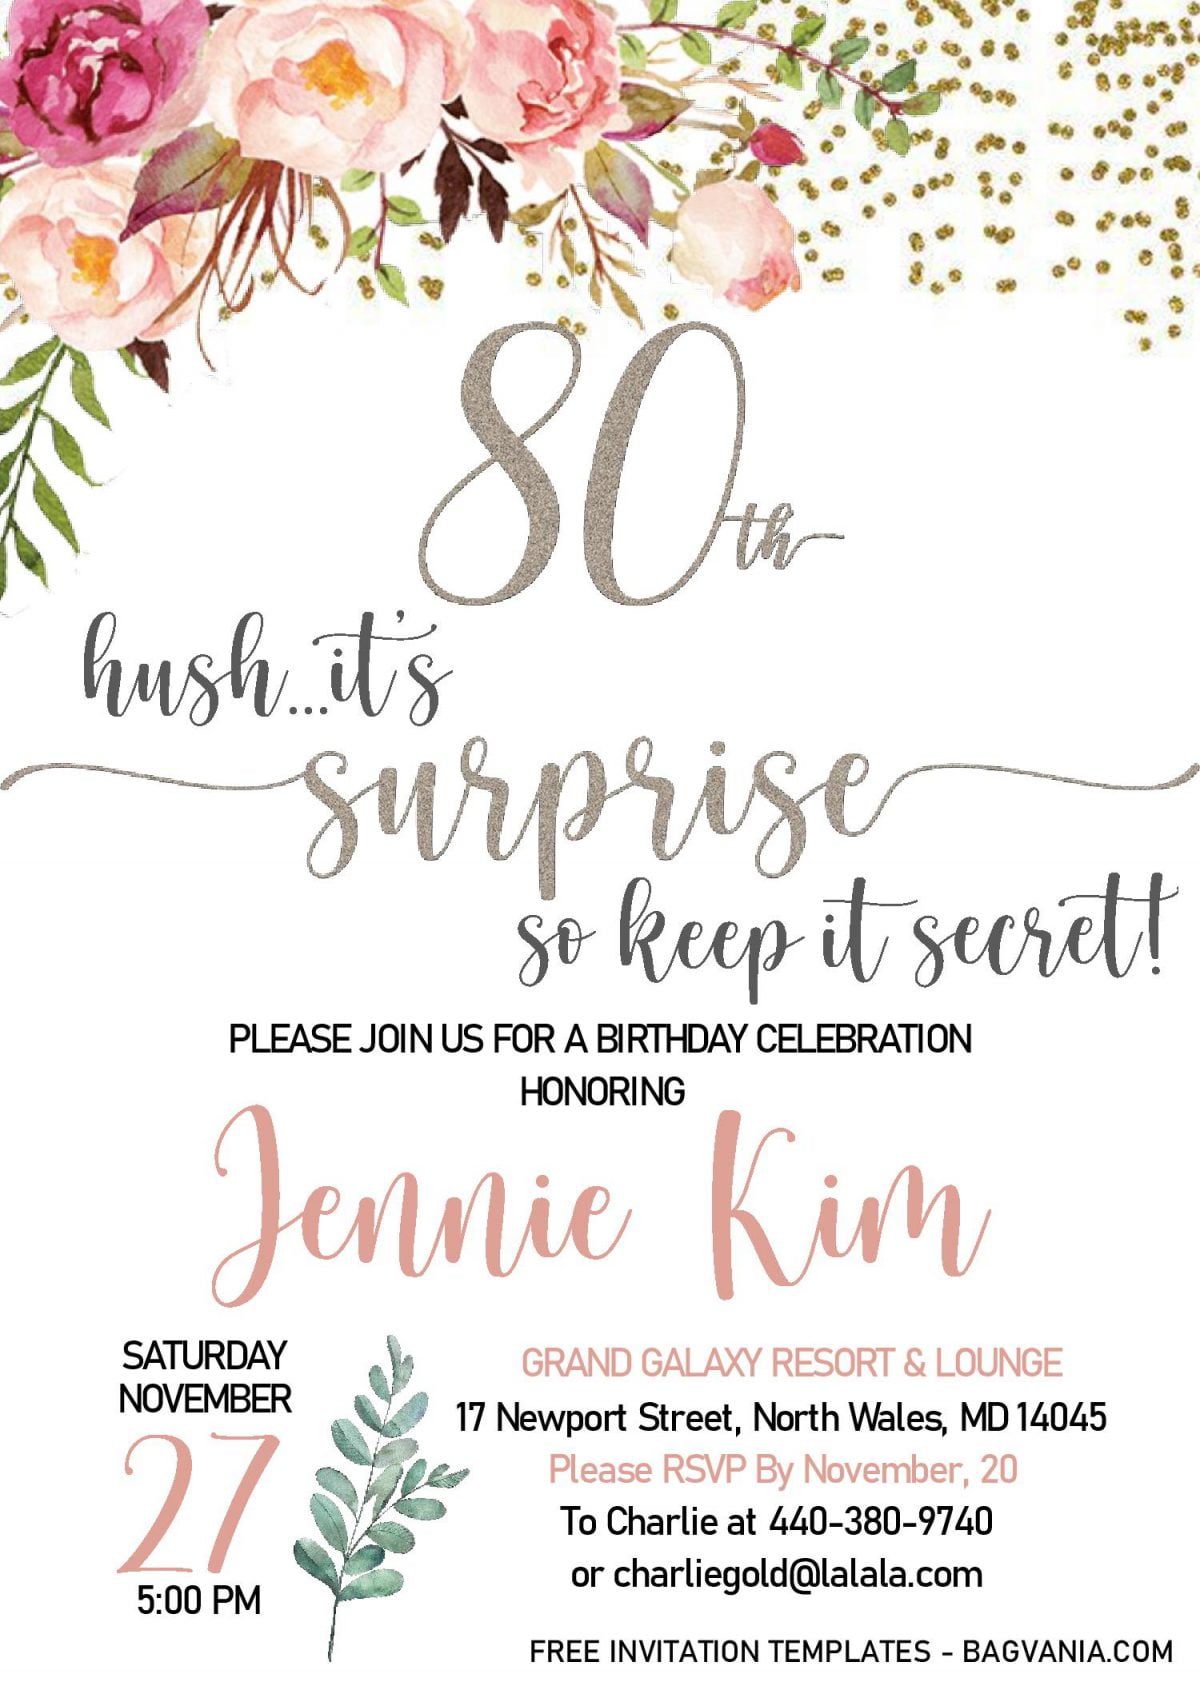 Floral 80th Birthday Invitation Templates - Editable With MS Word and has white peonies